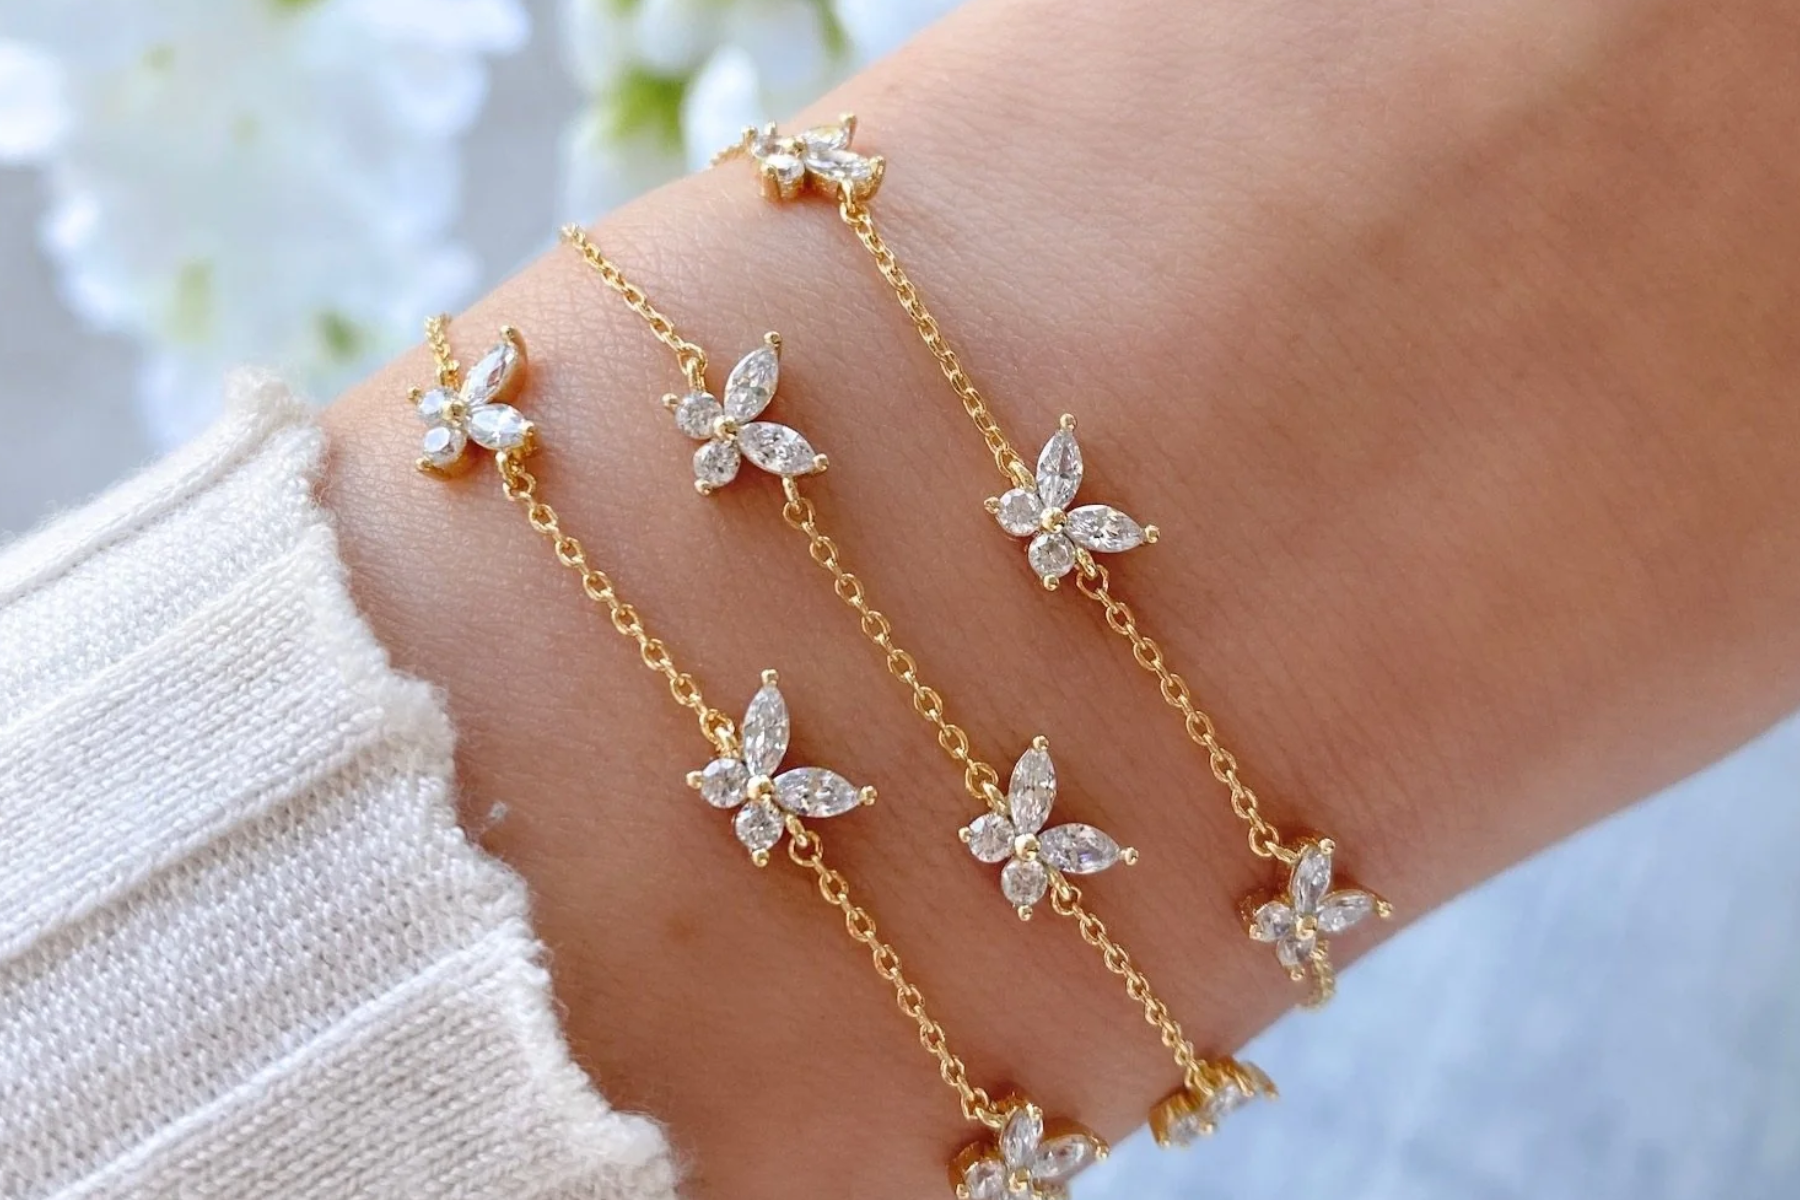 The wrist of a woman is adorned with three-layered butterfly bracelets